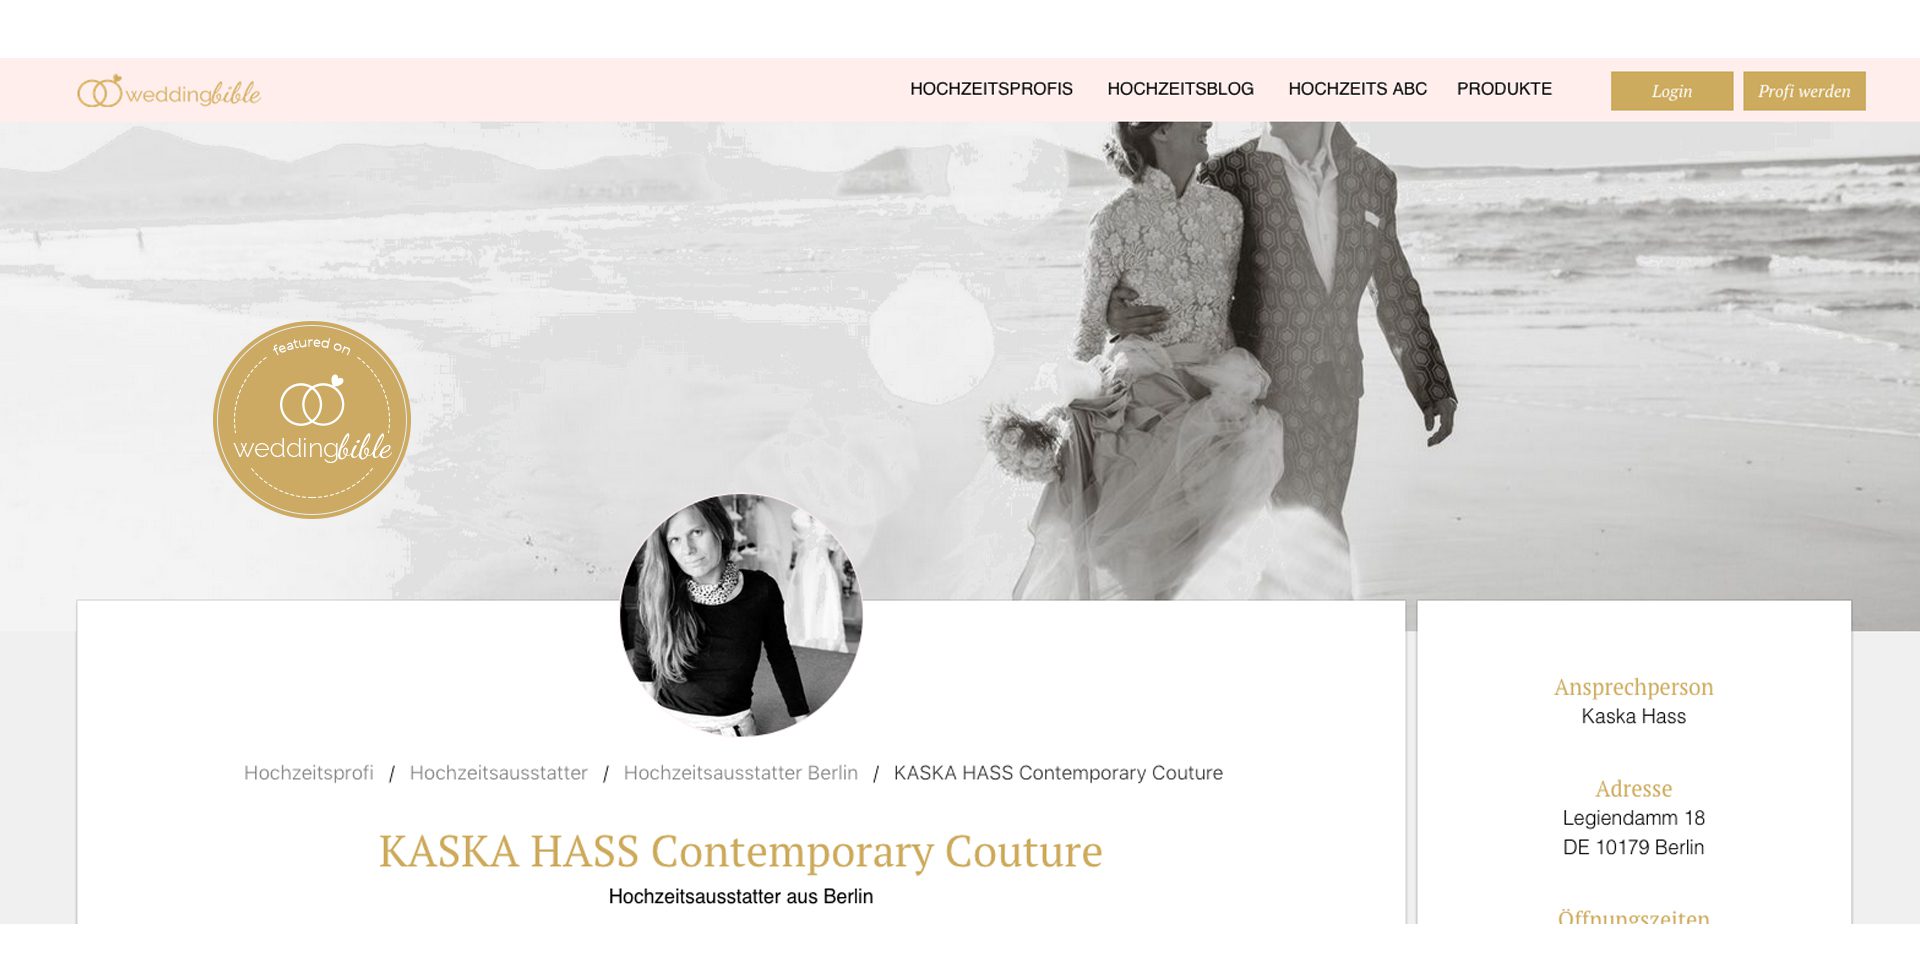 weddingbible featered Kaska Hass Contemporary Couture